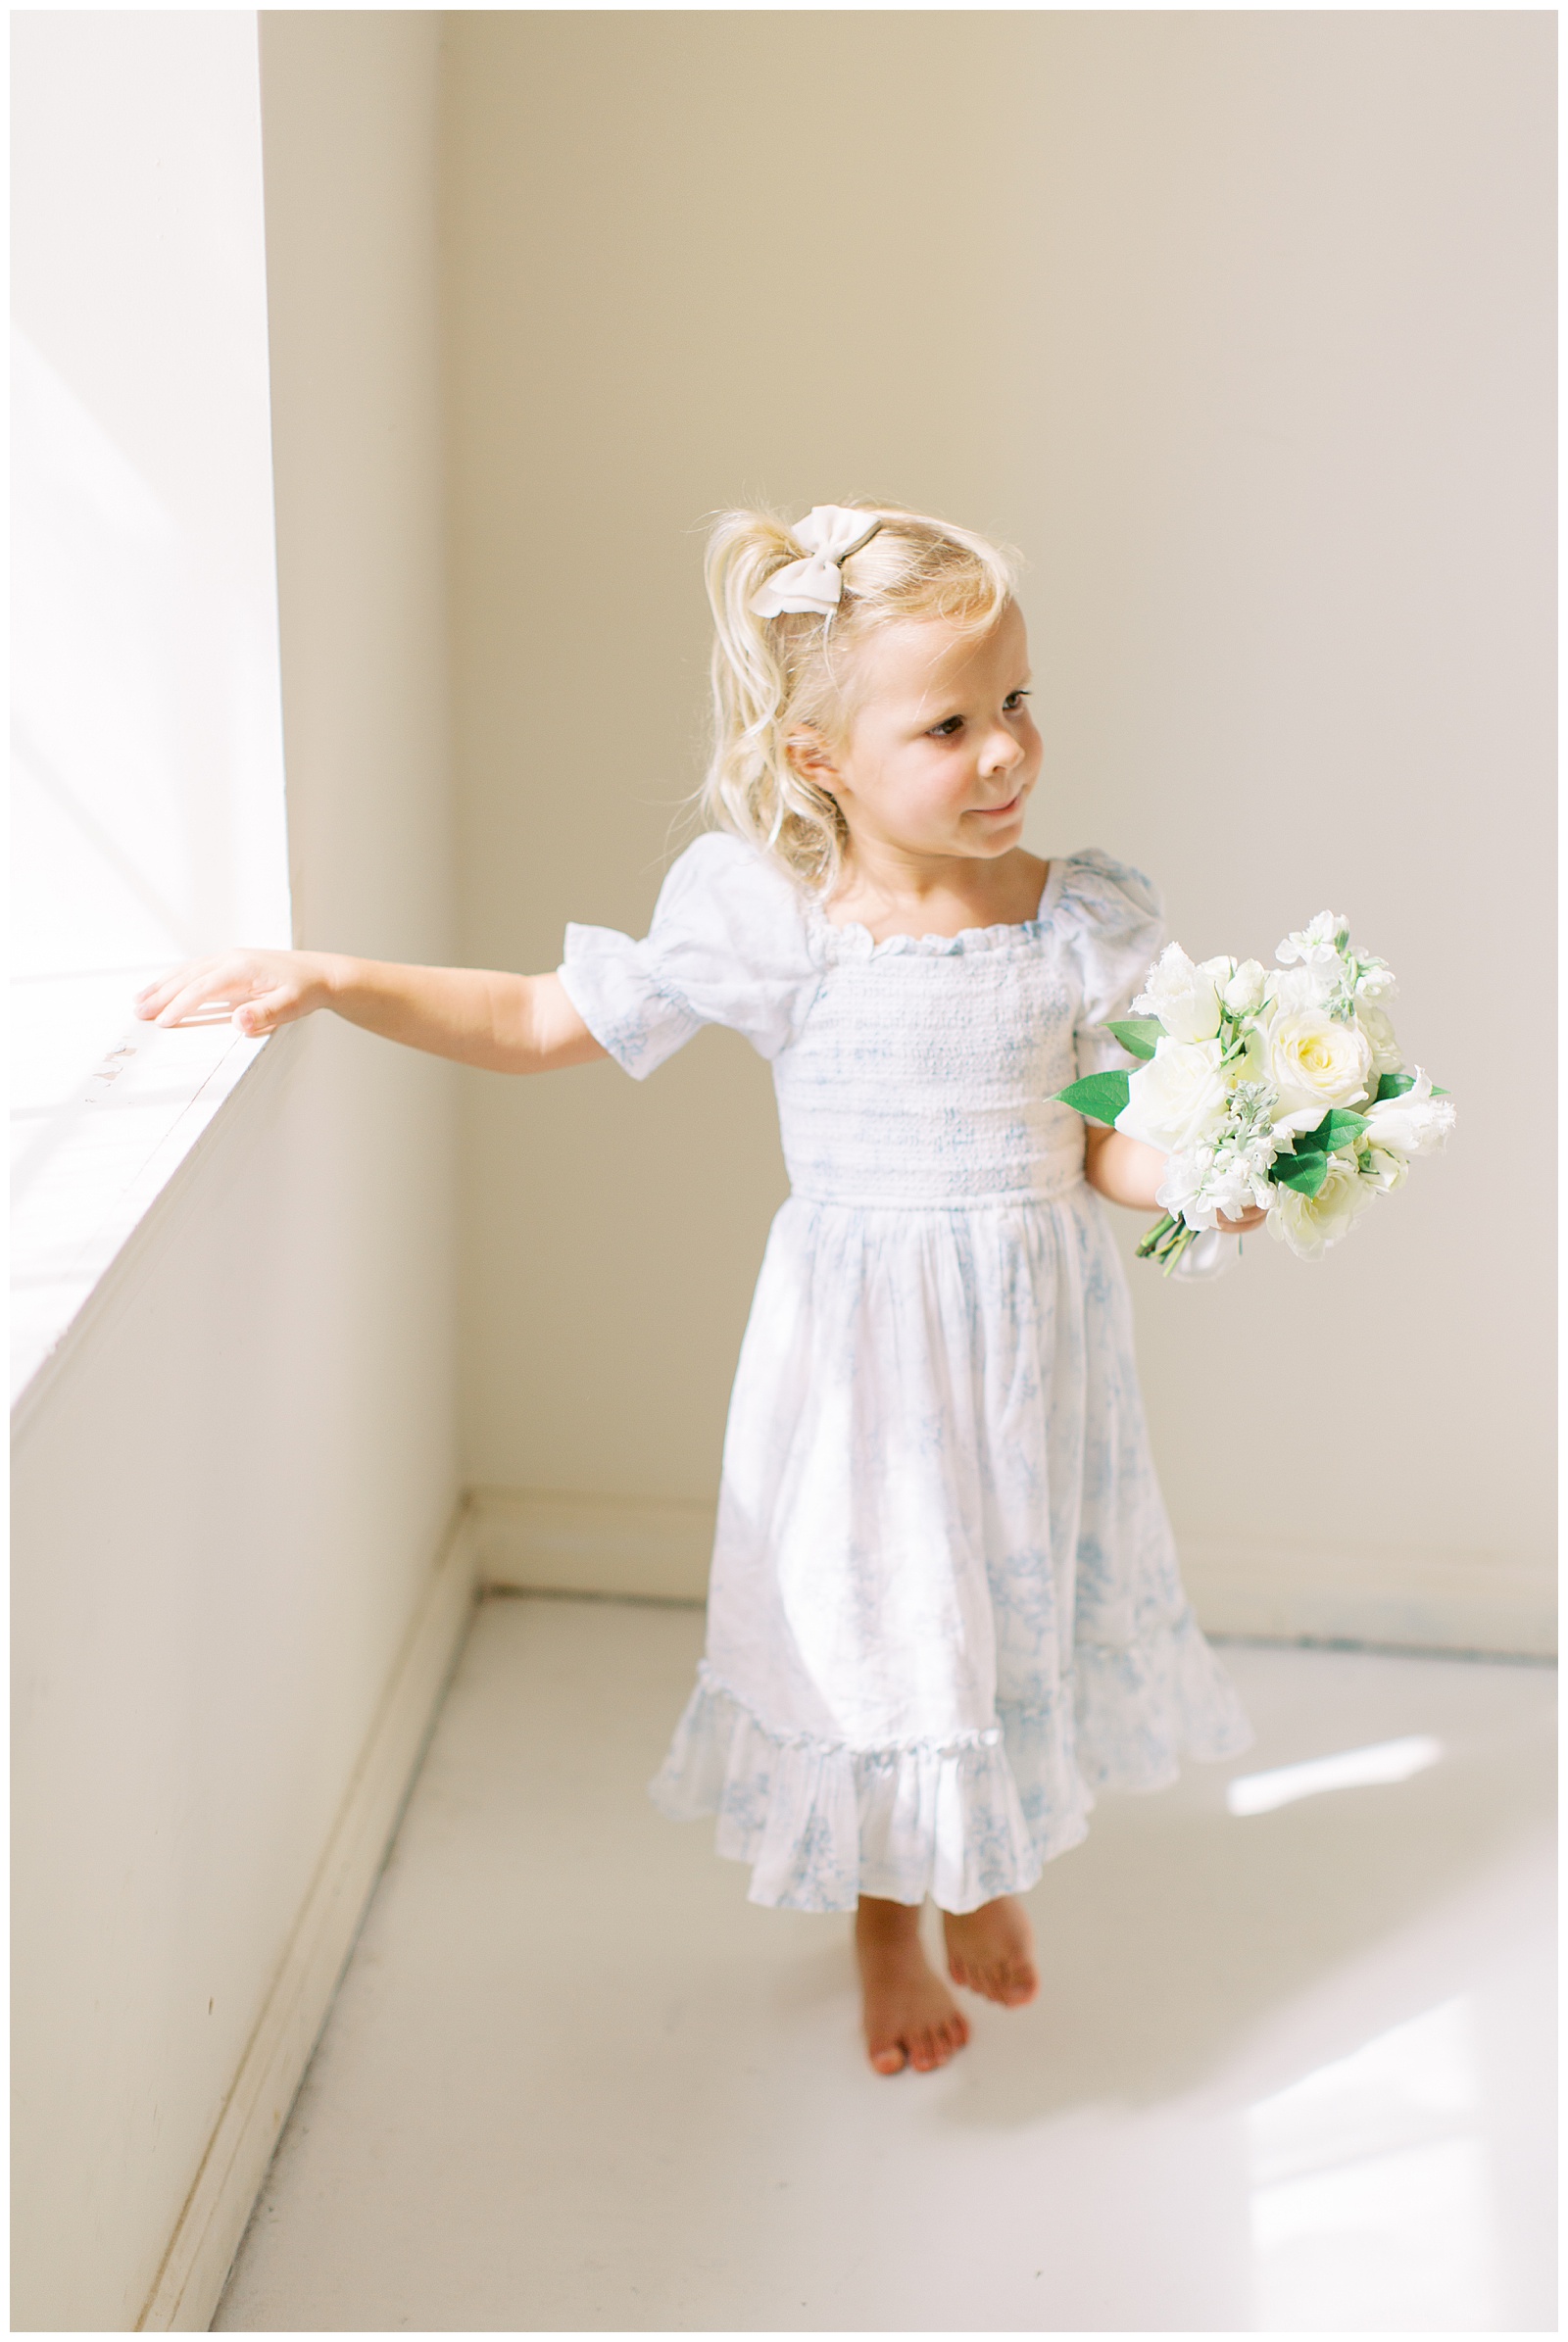 toddler poses by window in light blue and white dress